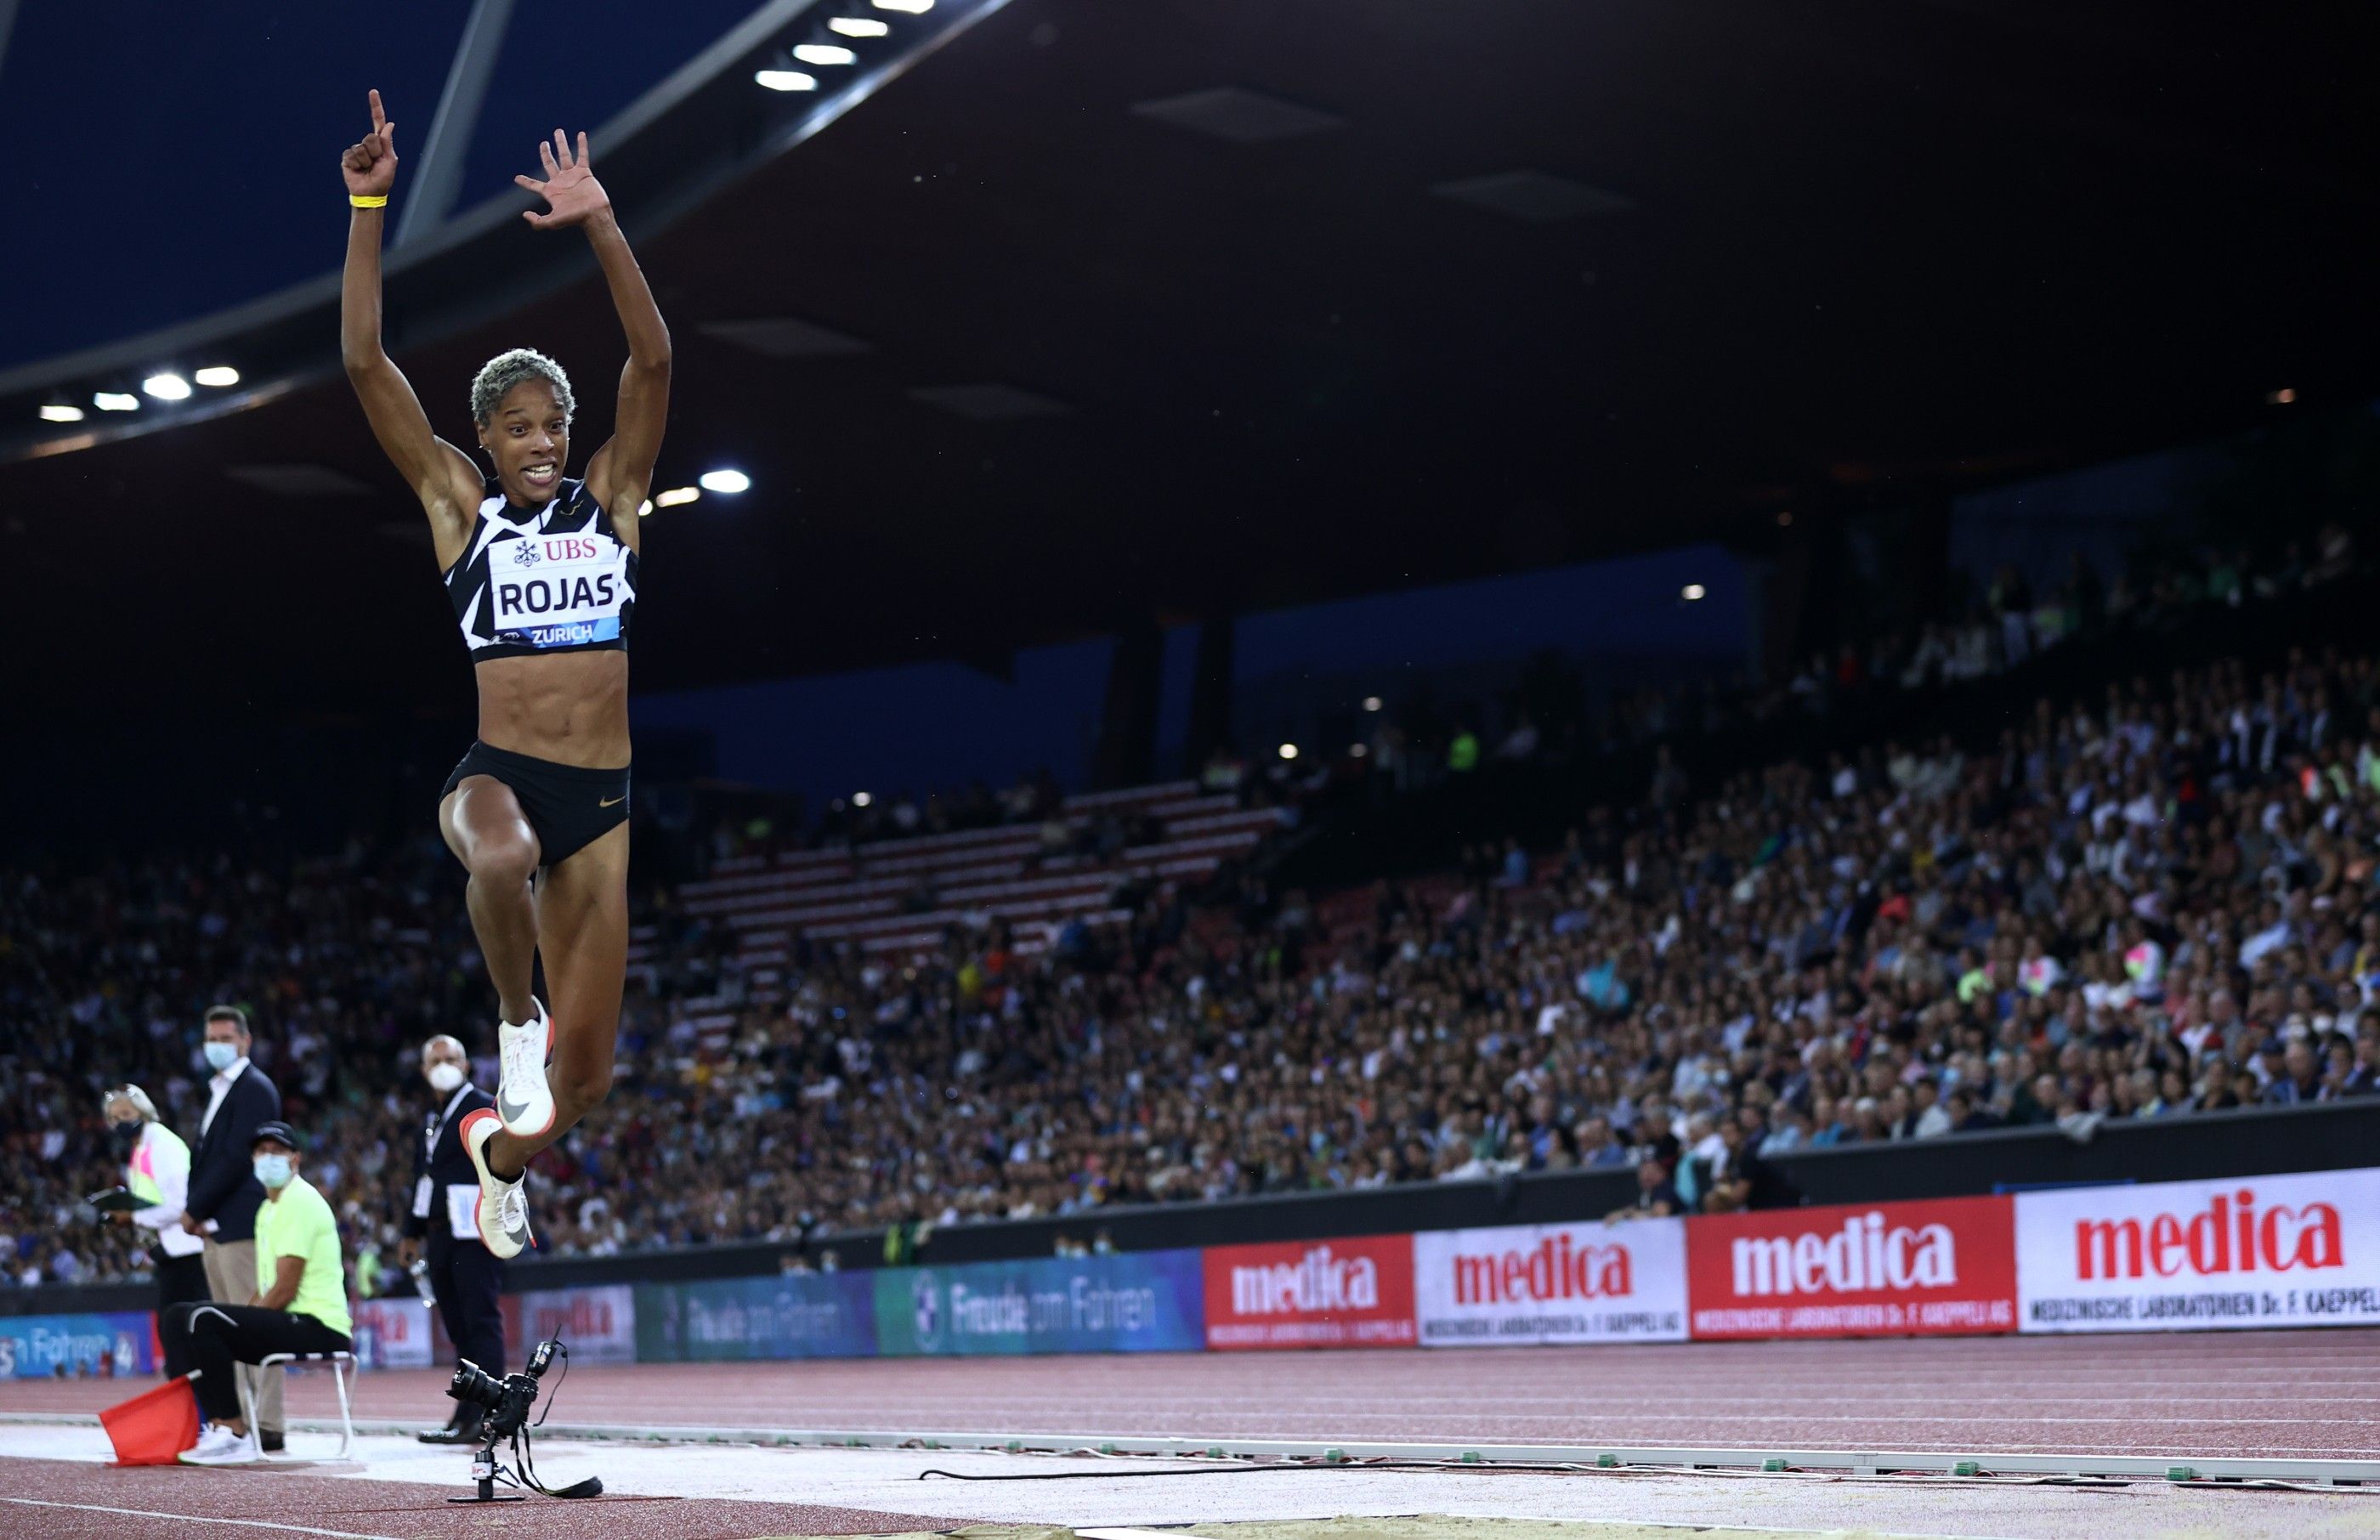 Yulimar Rojas competes in the Wanda Diamond League final in Zurich